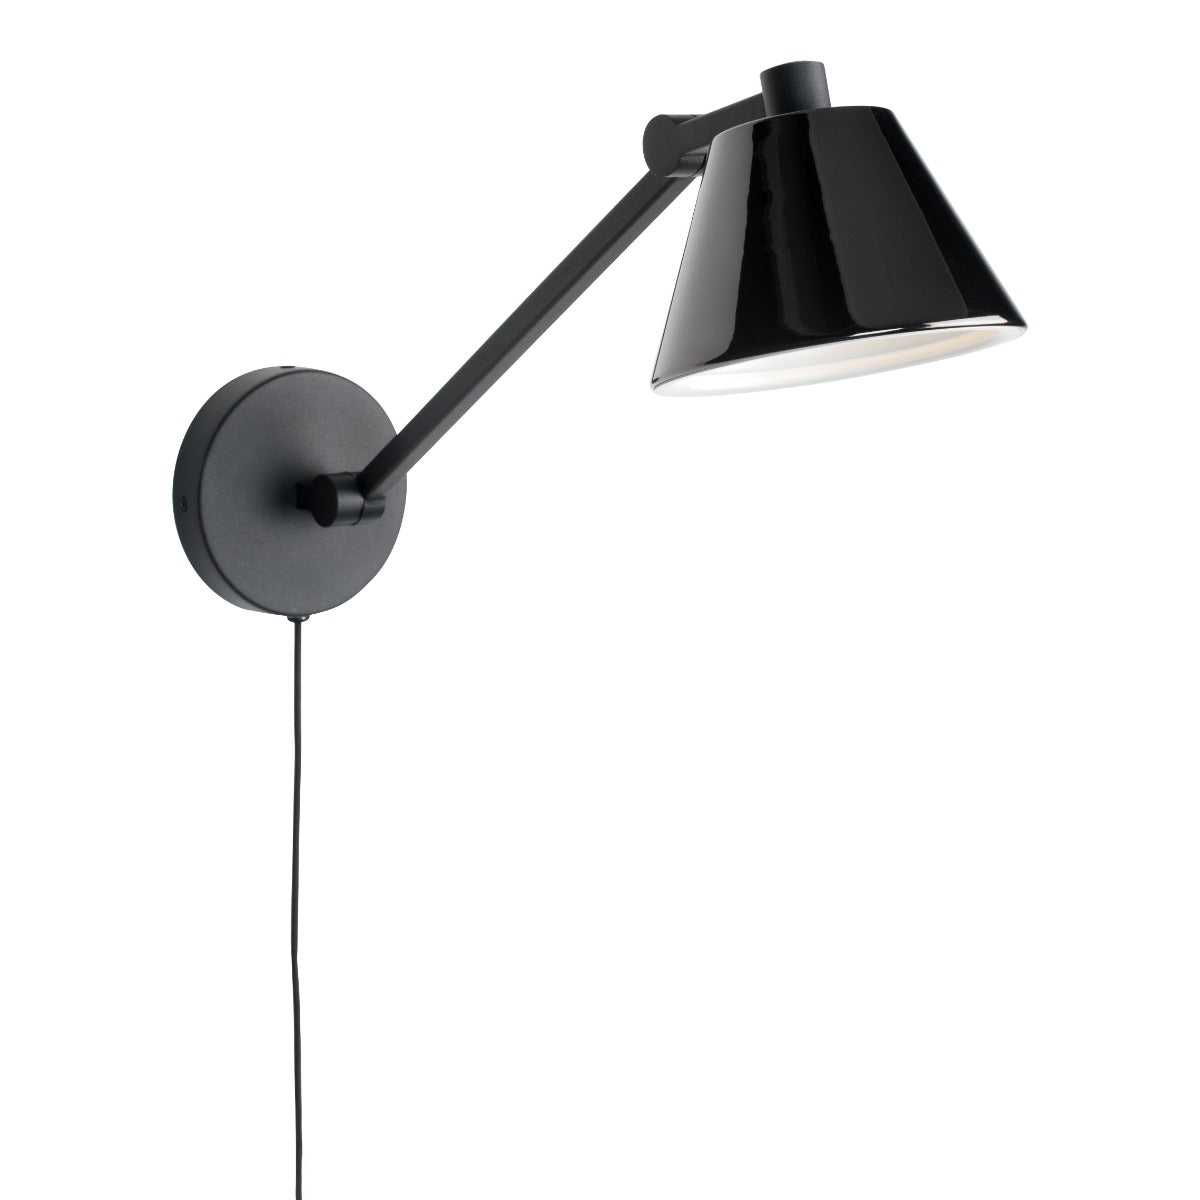 What not to like in a lamp or? This stunning lamp is made entirely of durable metal, has an adjustable shuttle frame and a fascinating narrowing lampshade with a cool, black shiny finish. Inside the lampshade there is a white coating, which resembles ceramics and will perfectly match every modern office, a Scandinavian salon or a minimalist office.